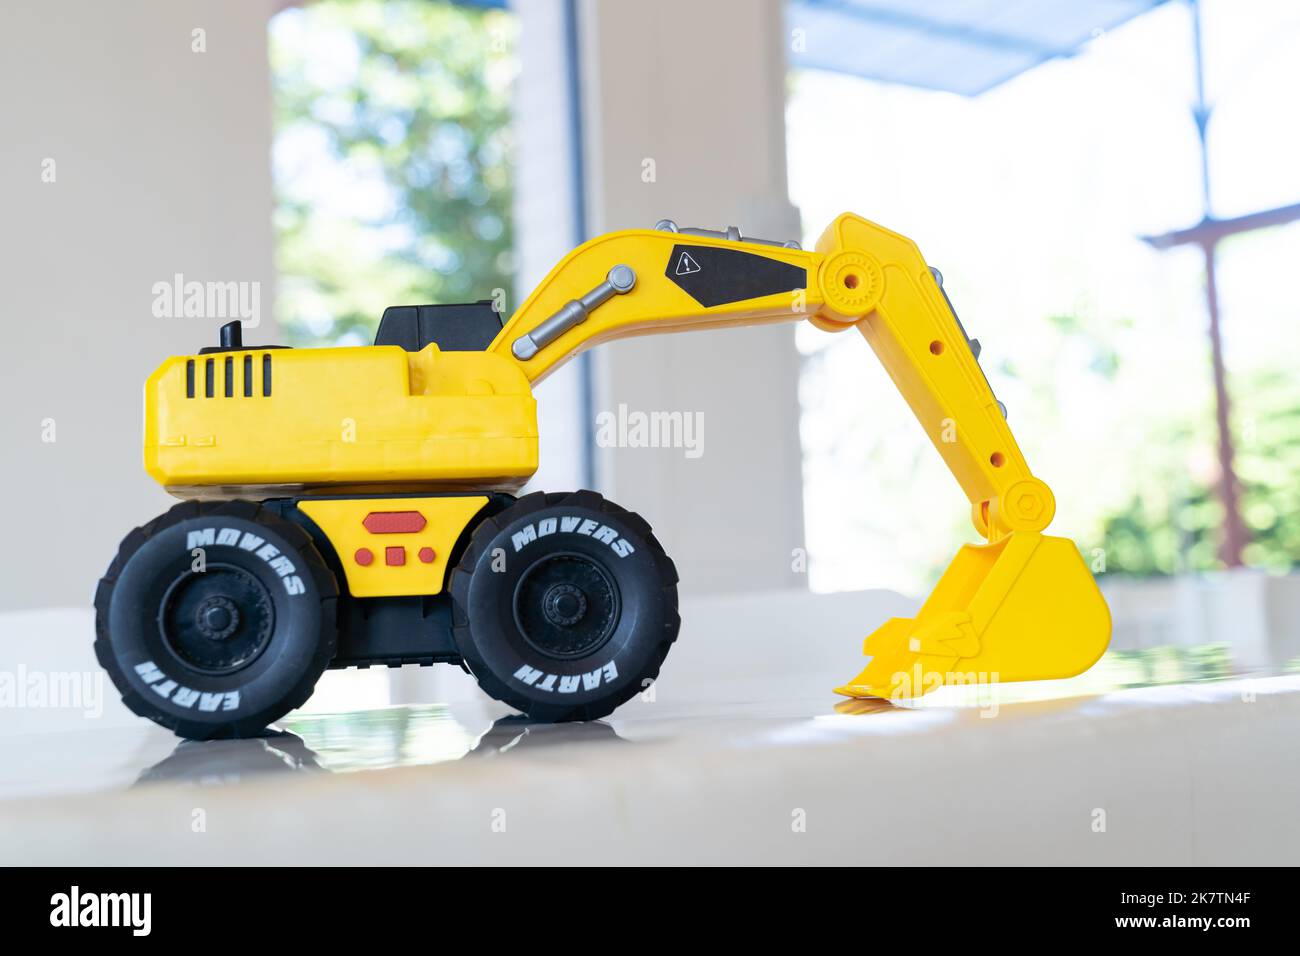 Backhoe loader, yellow construction toy vehicle with articulated parts built with sturdy plastic is placed on a table. Stock Photo